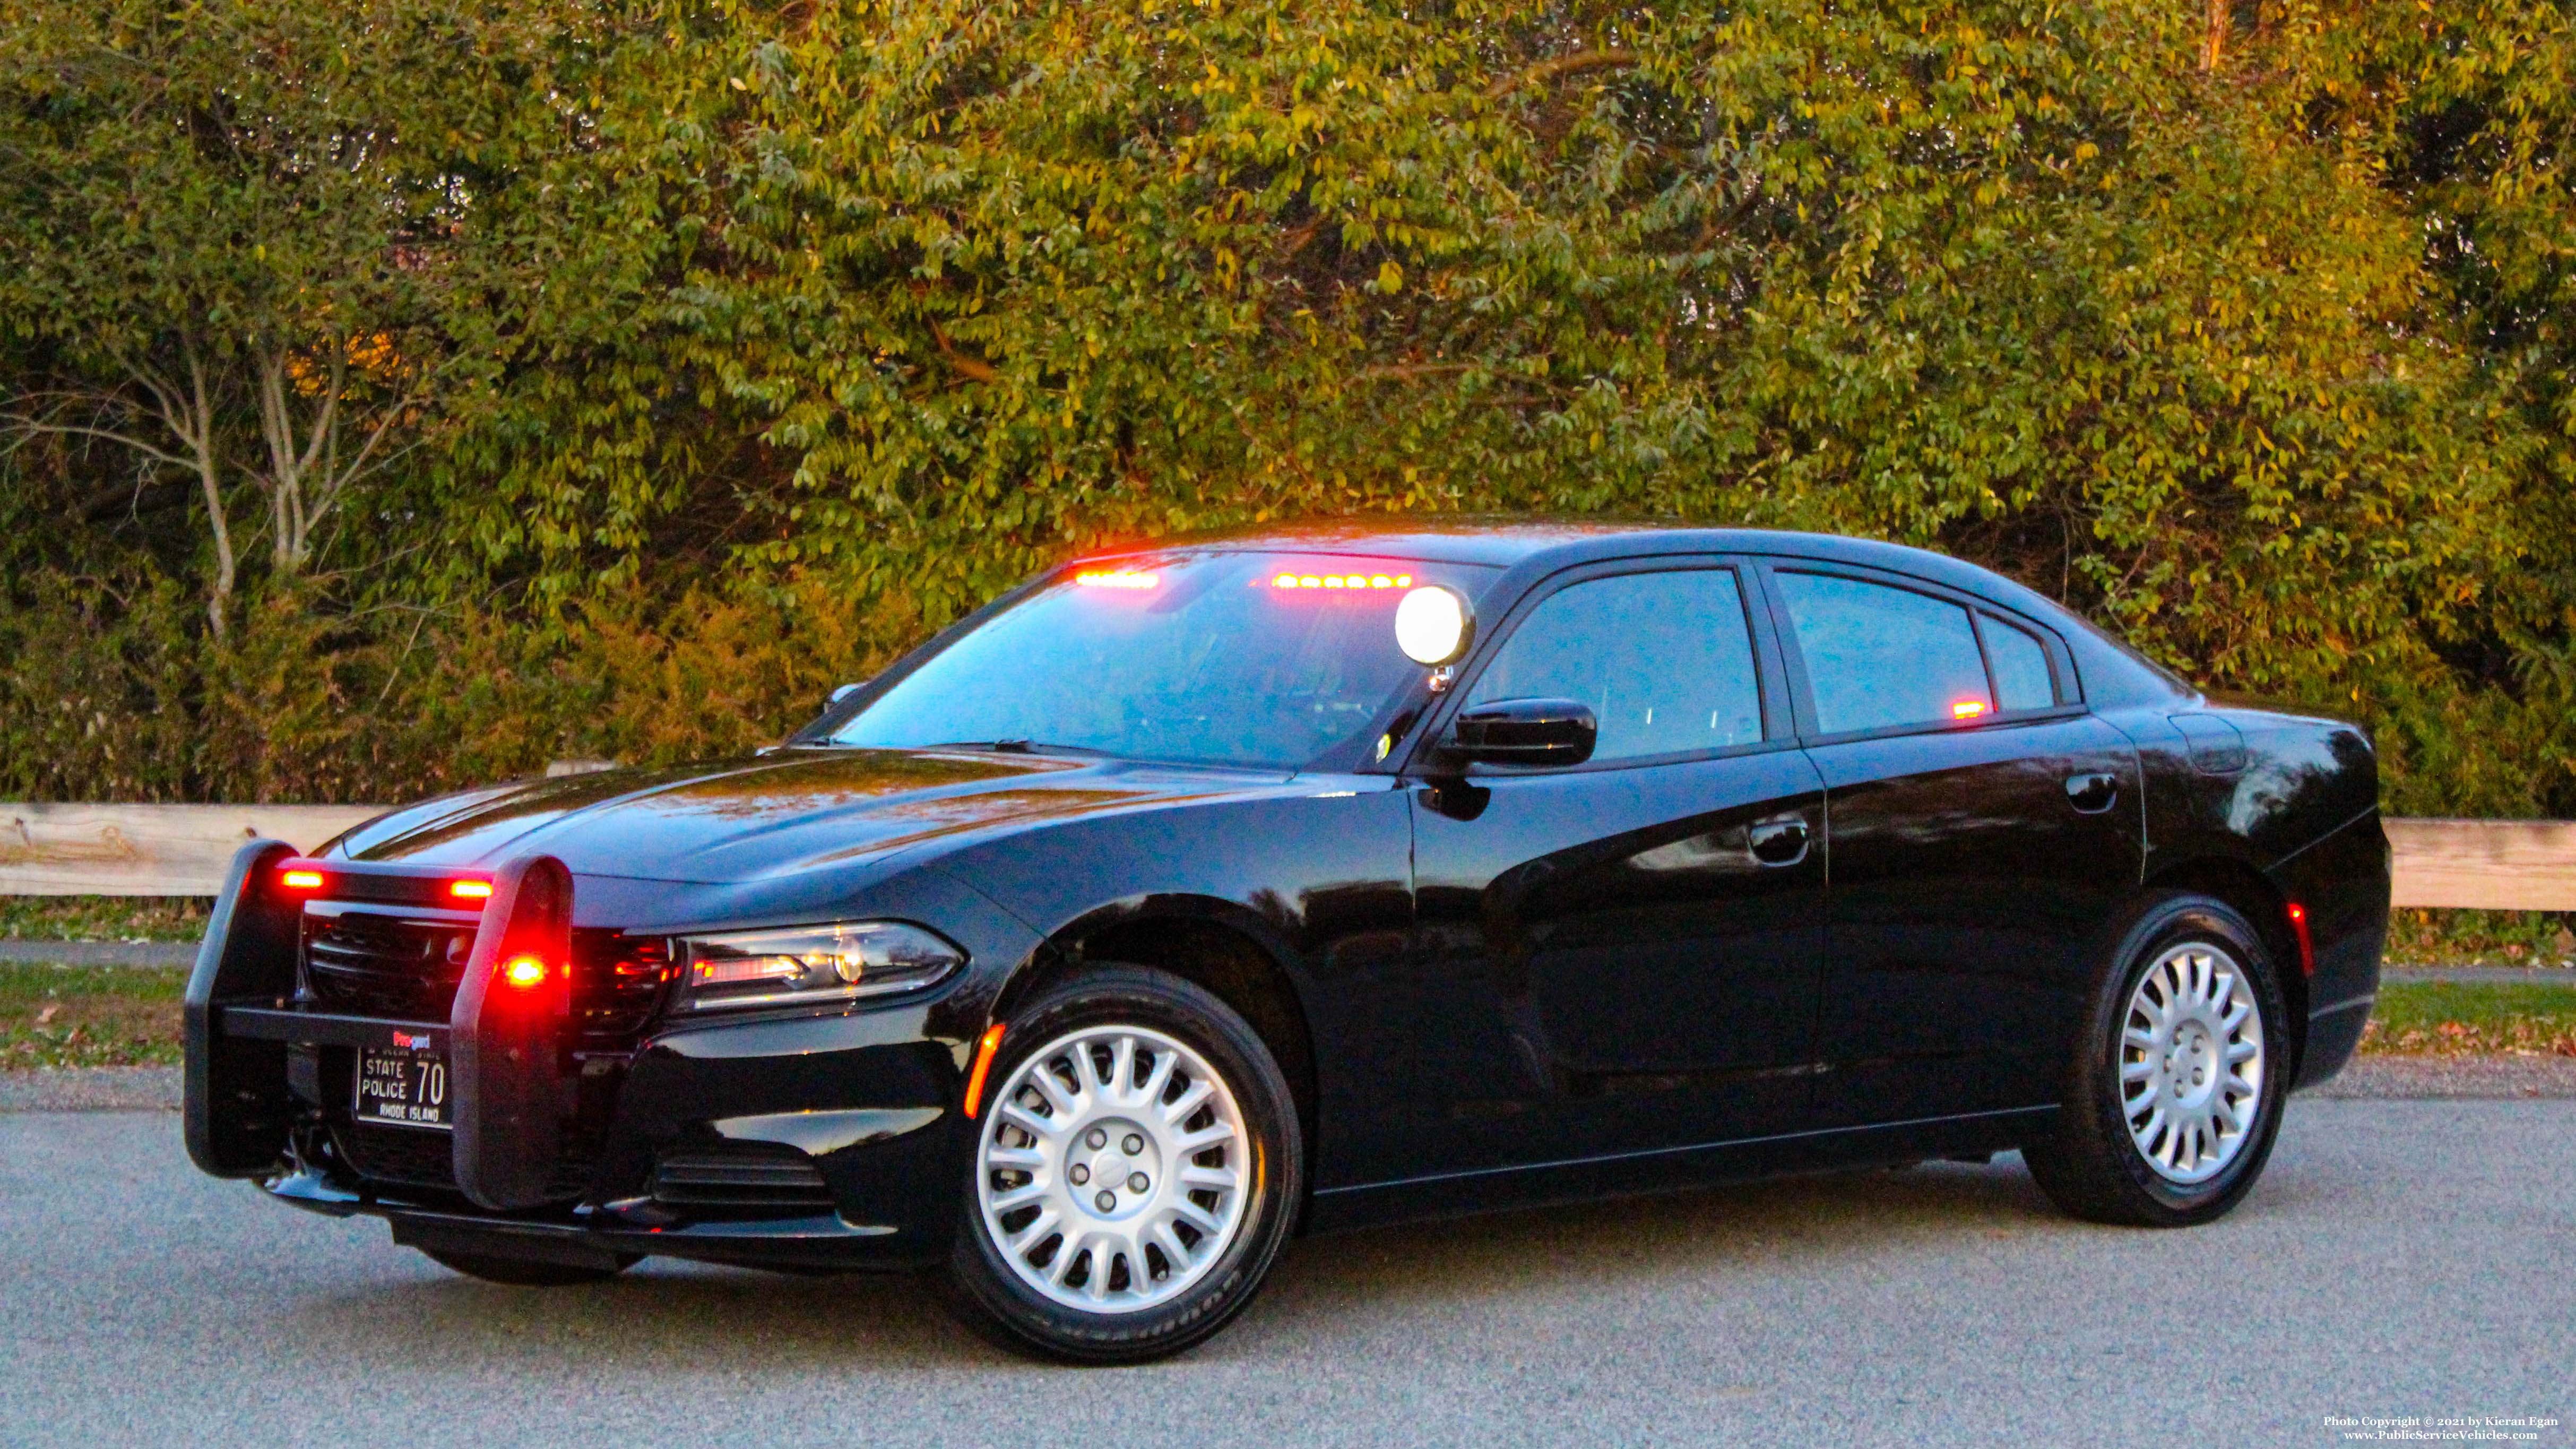 A photo  of Rhode Island State Police
            Cruiser 70, a 2021 Dodge Charger             taken by Kieran Egan